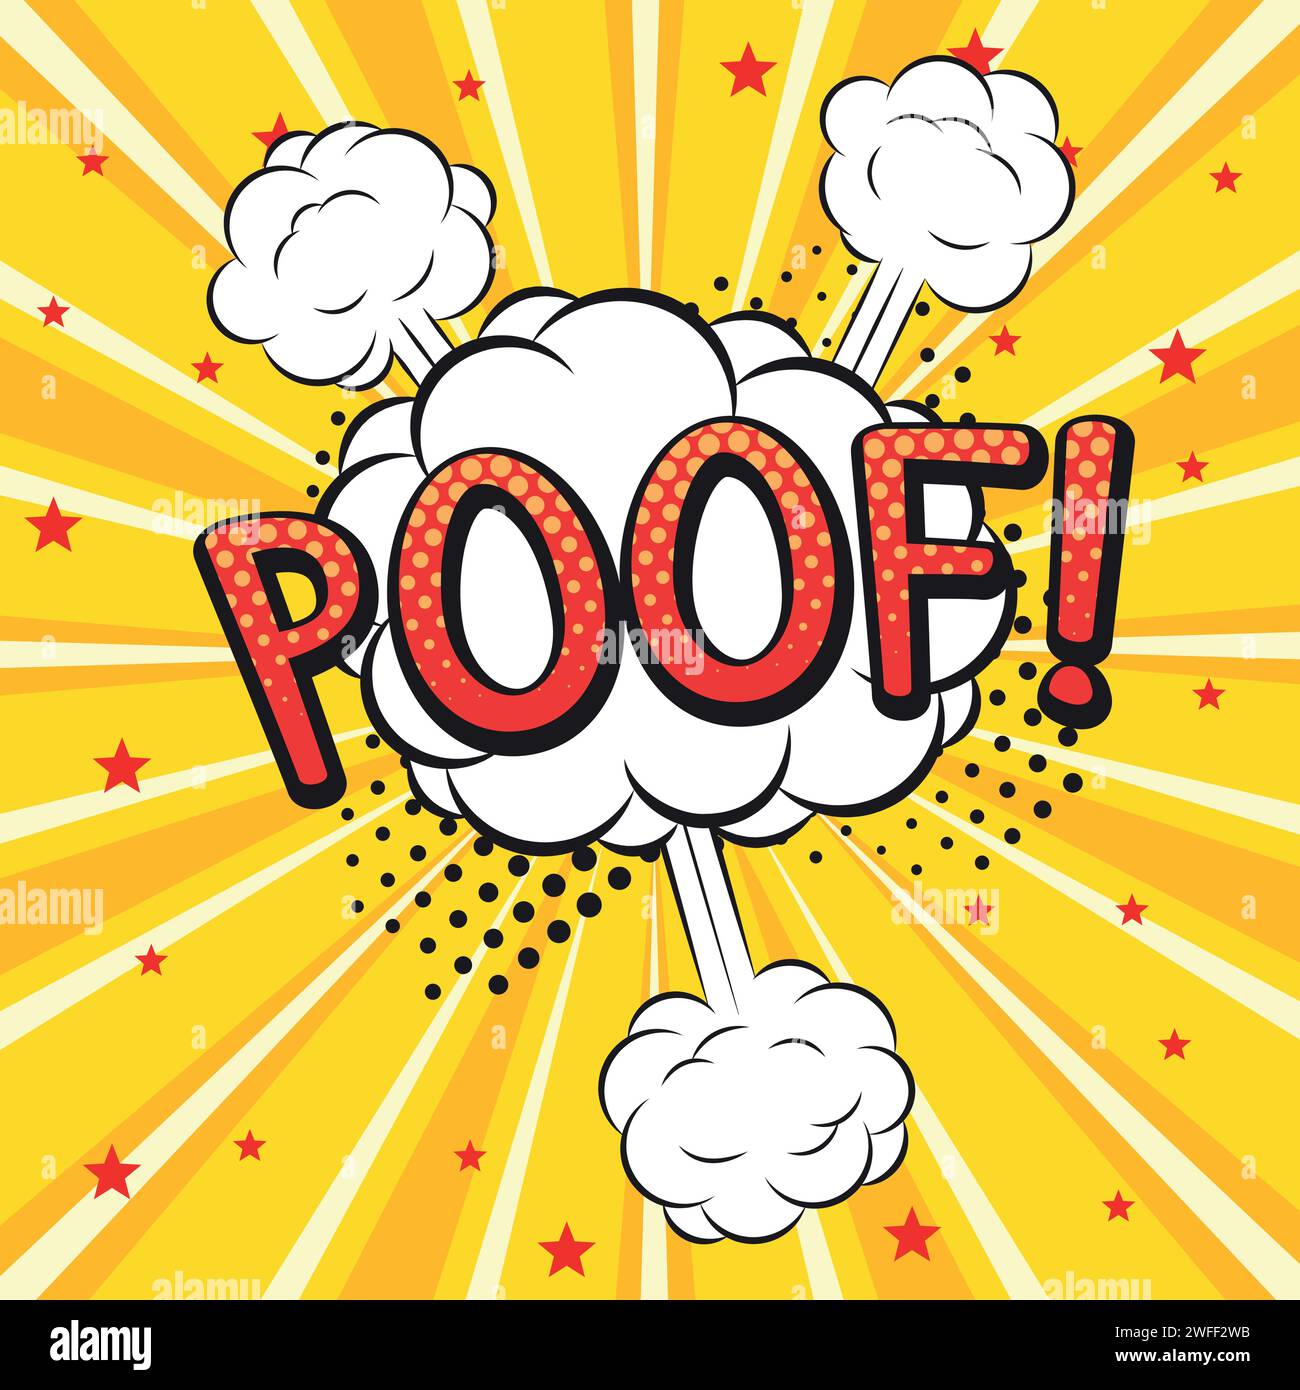 Poof text pop art style vector image Stock Vector